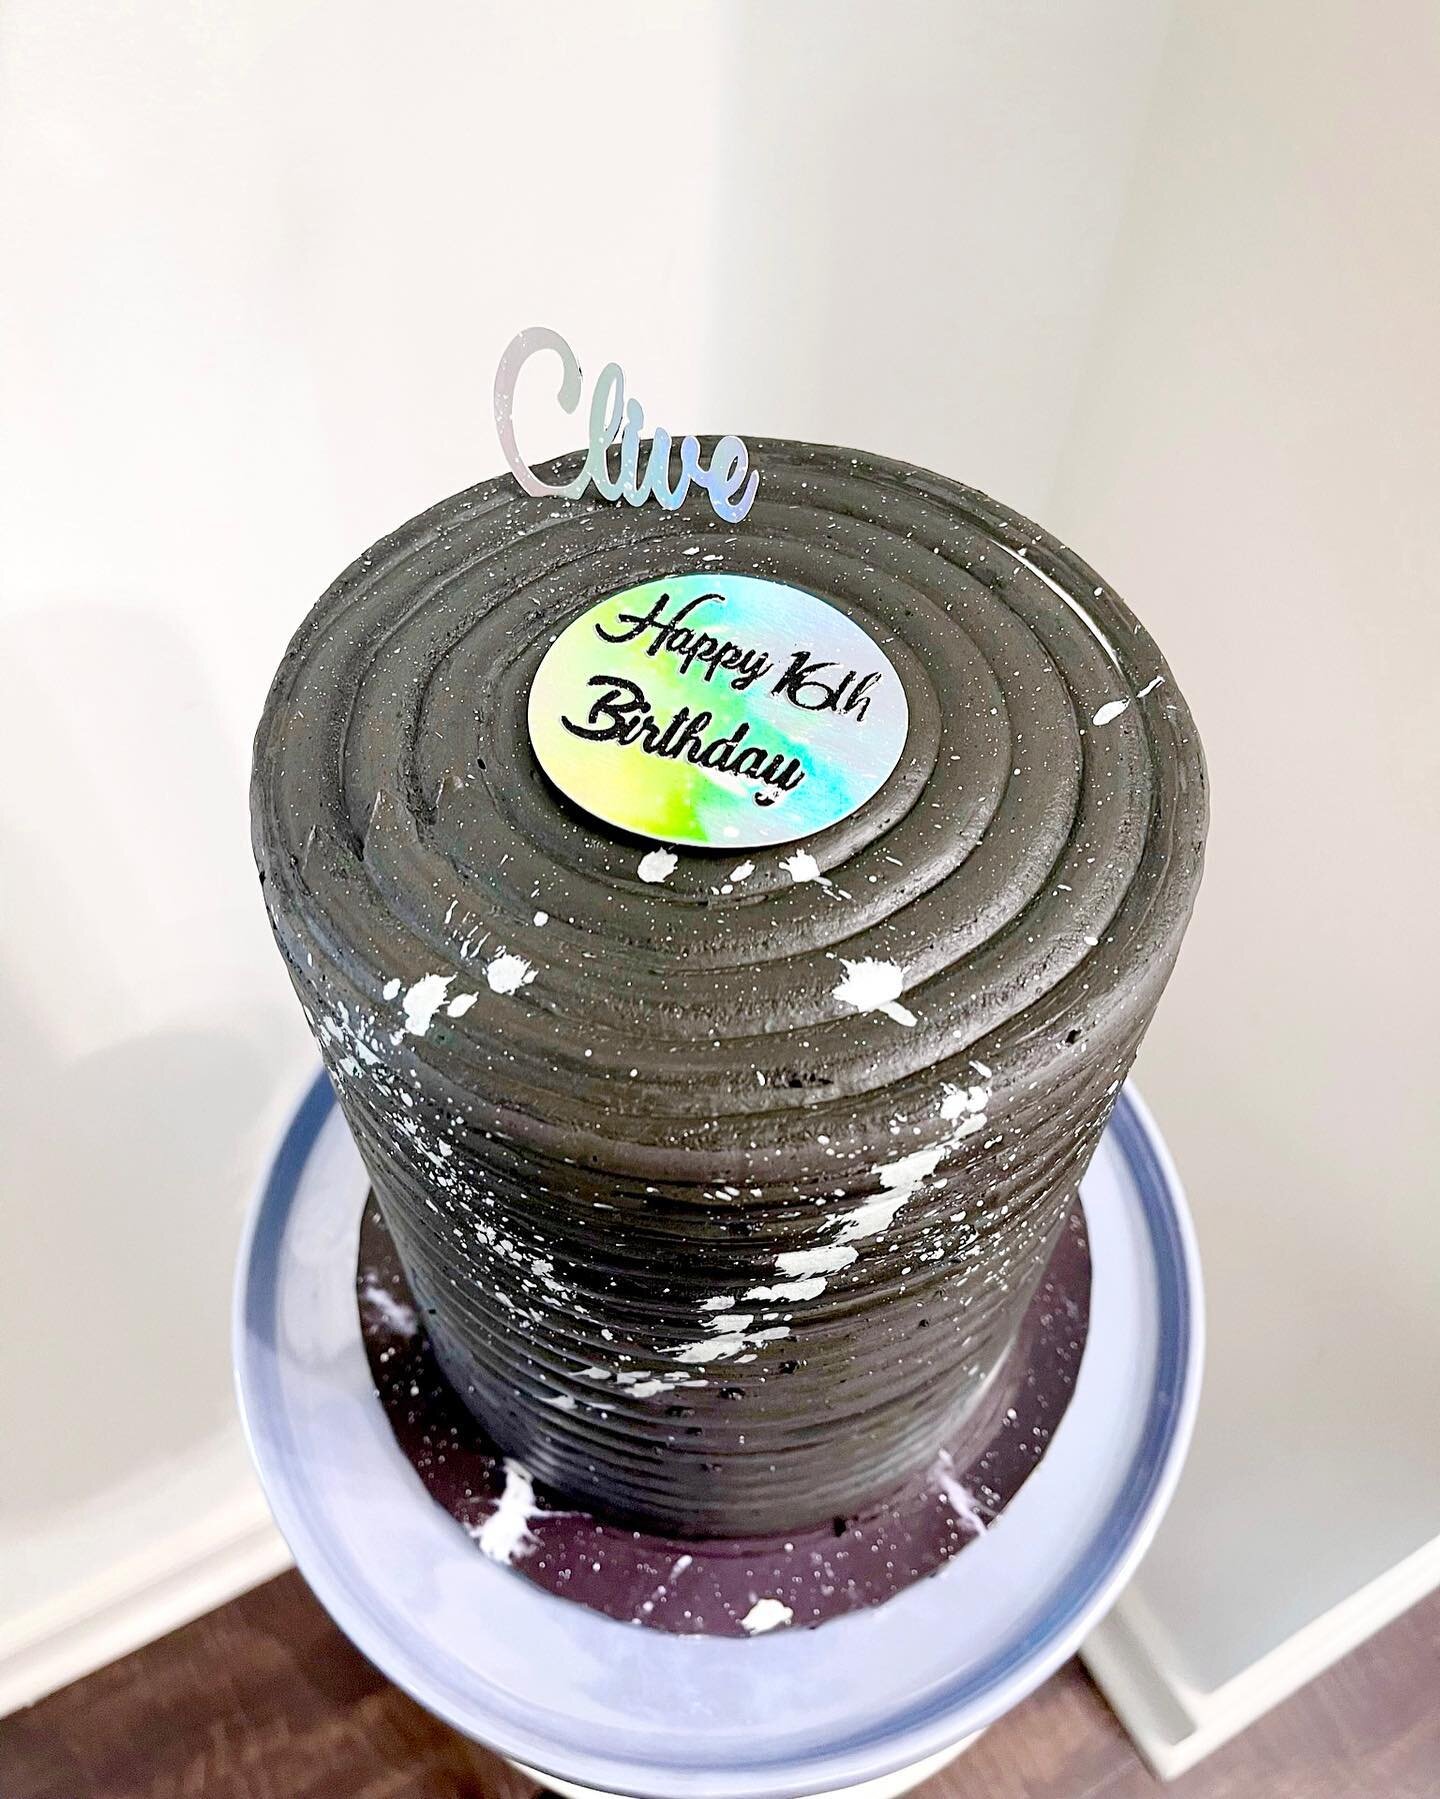 Stack of vinyl records or cake, you decide? 🤔